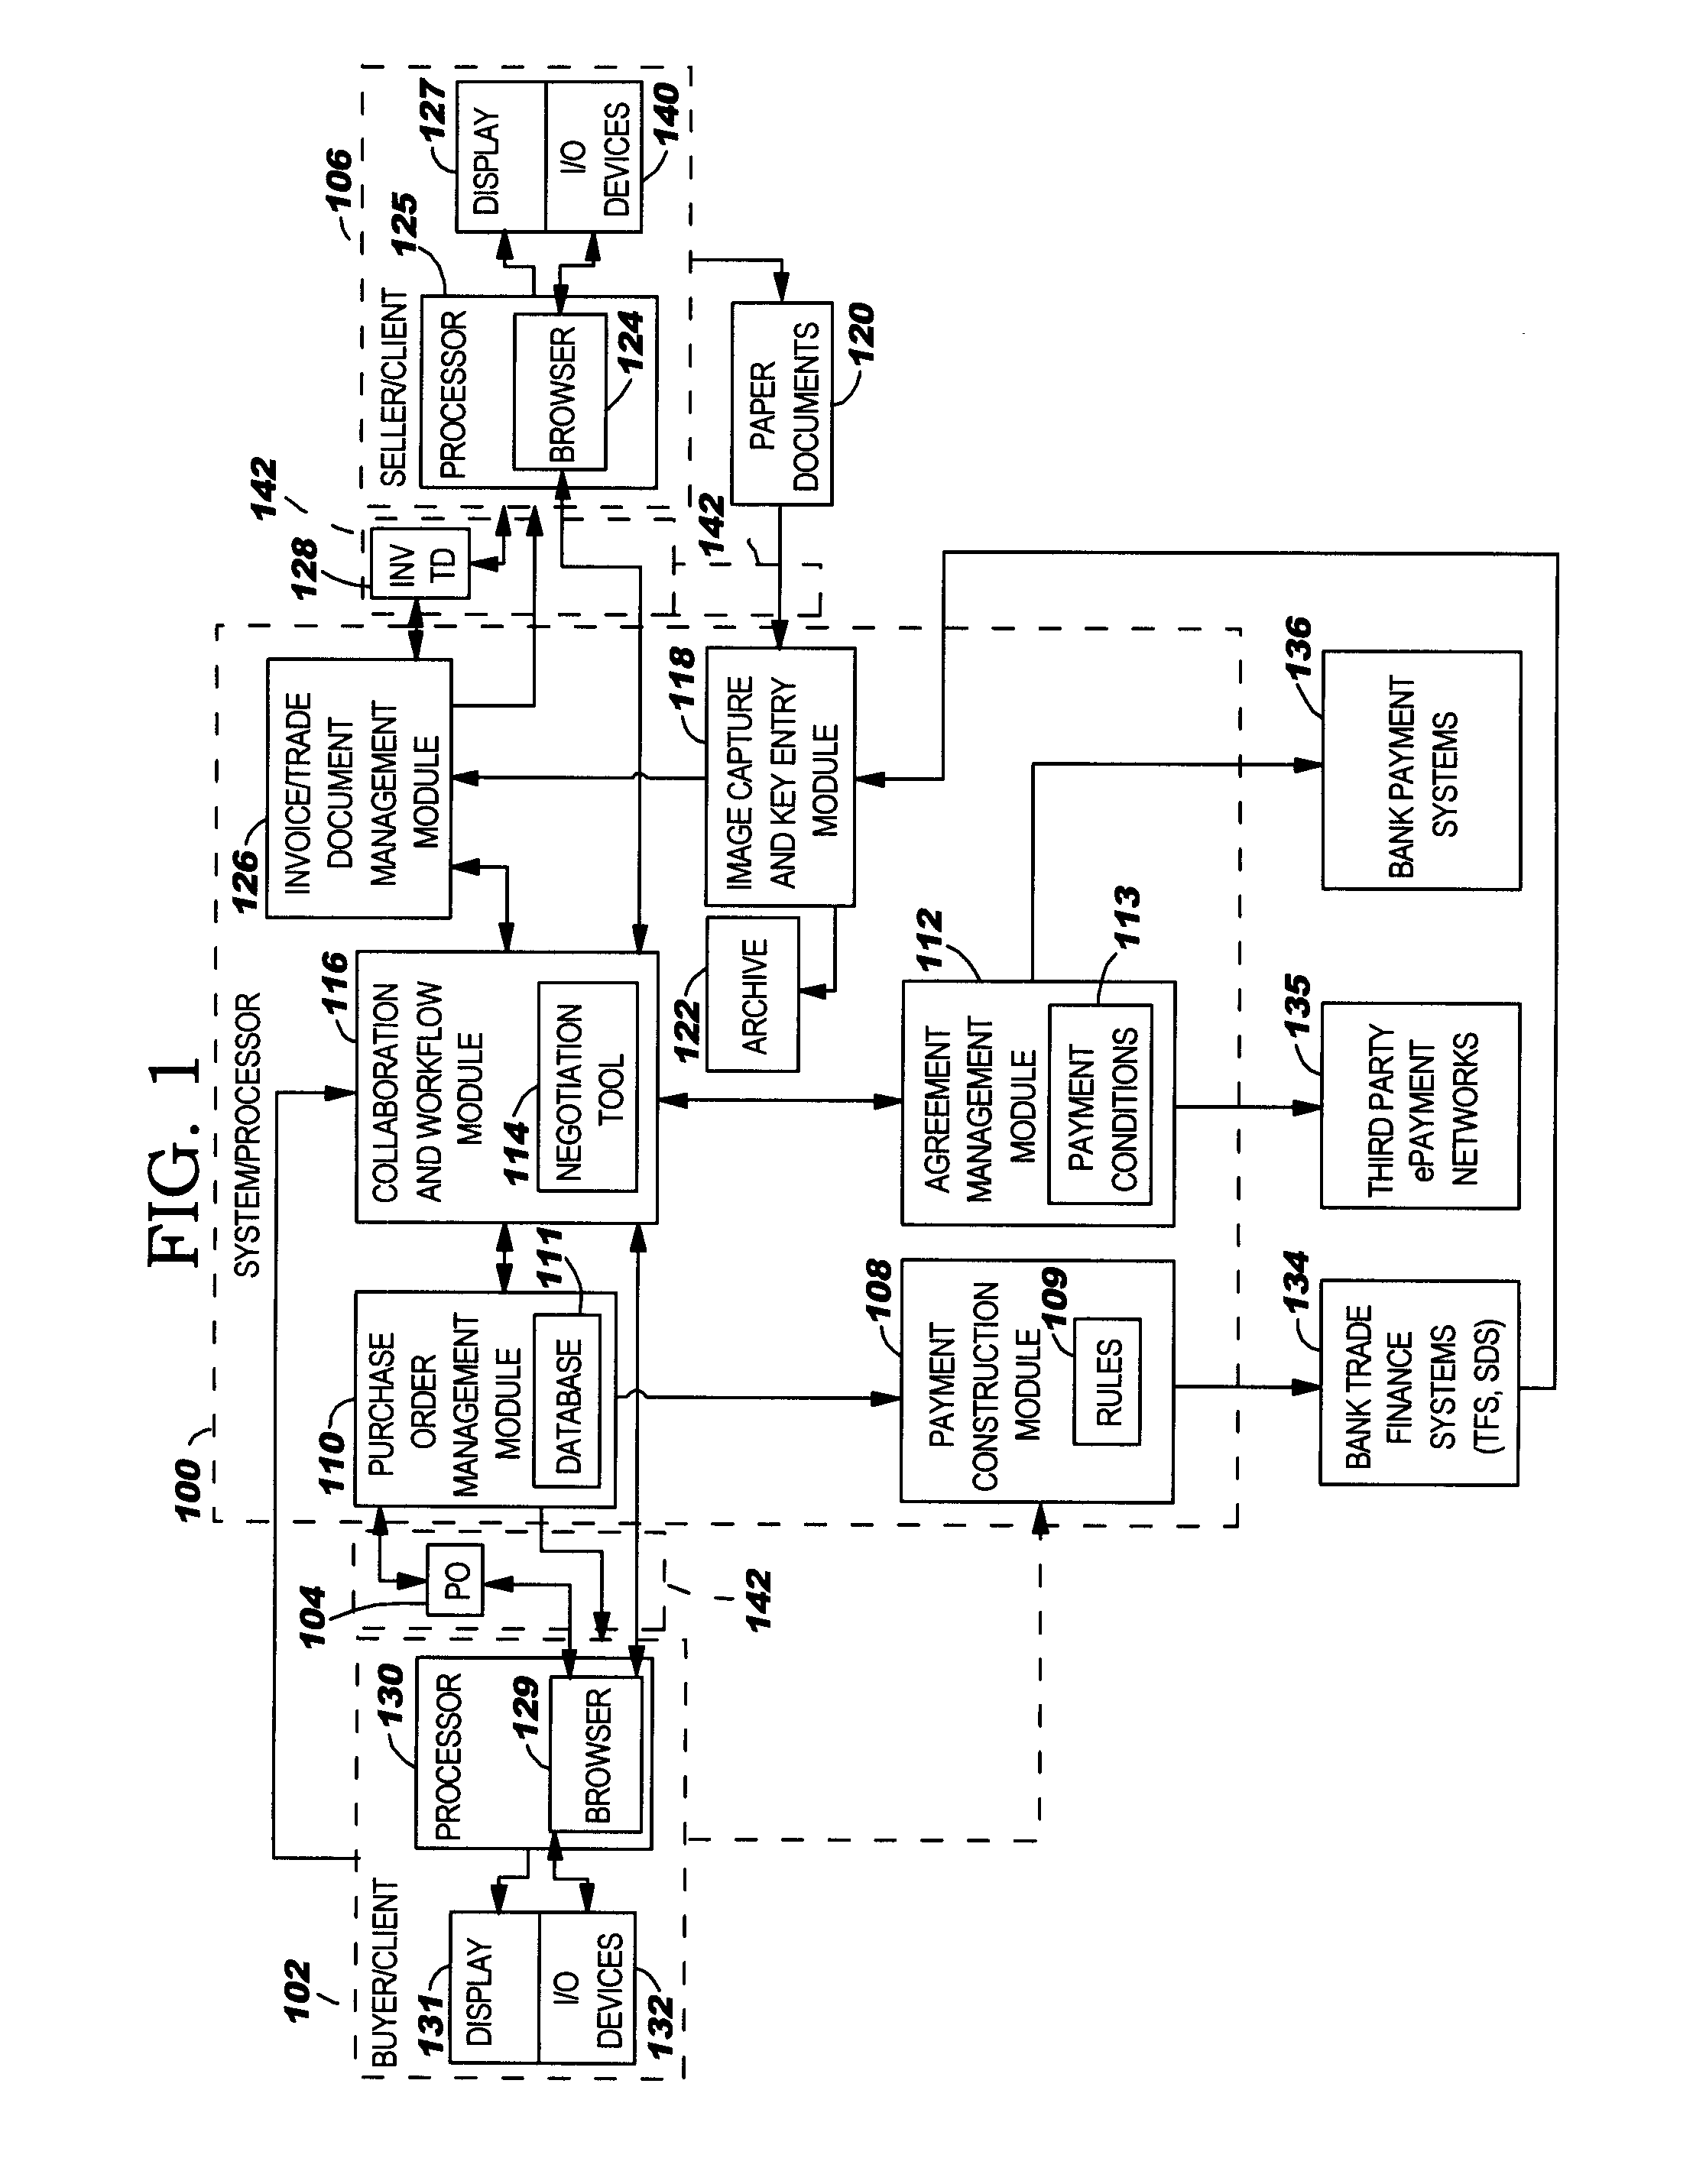 System and method to manage supply chain settlement, risk and liquidity